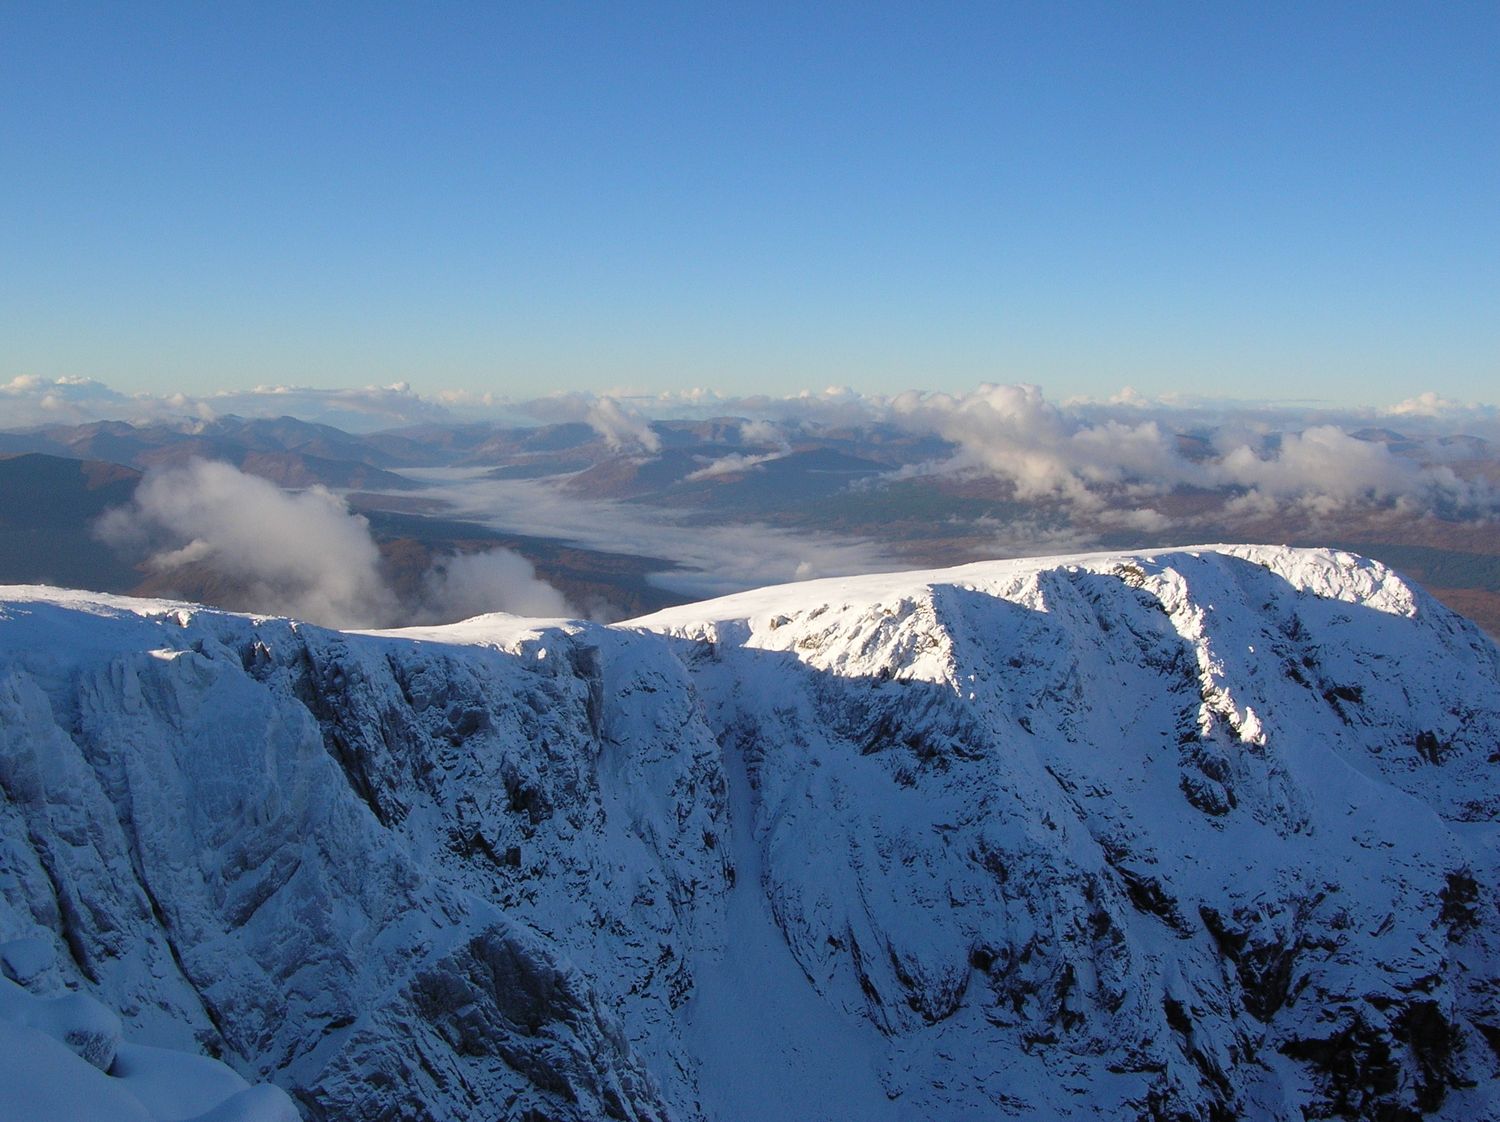  Looking towards the sea from the Ben Nevis plateau 